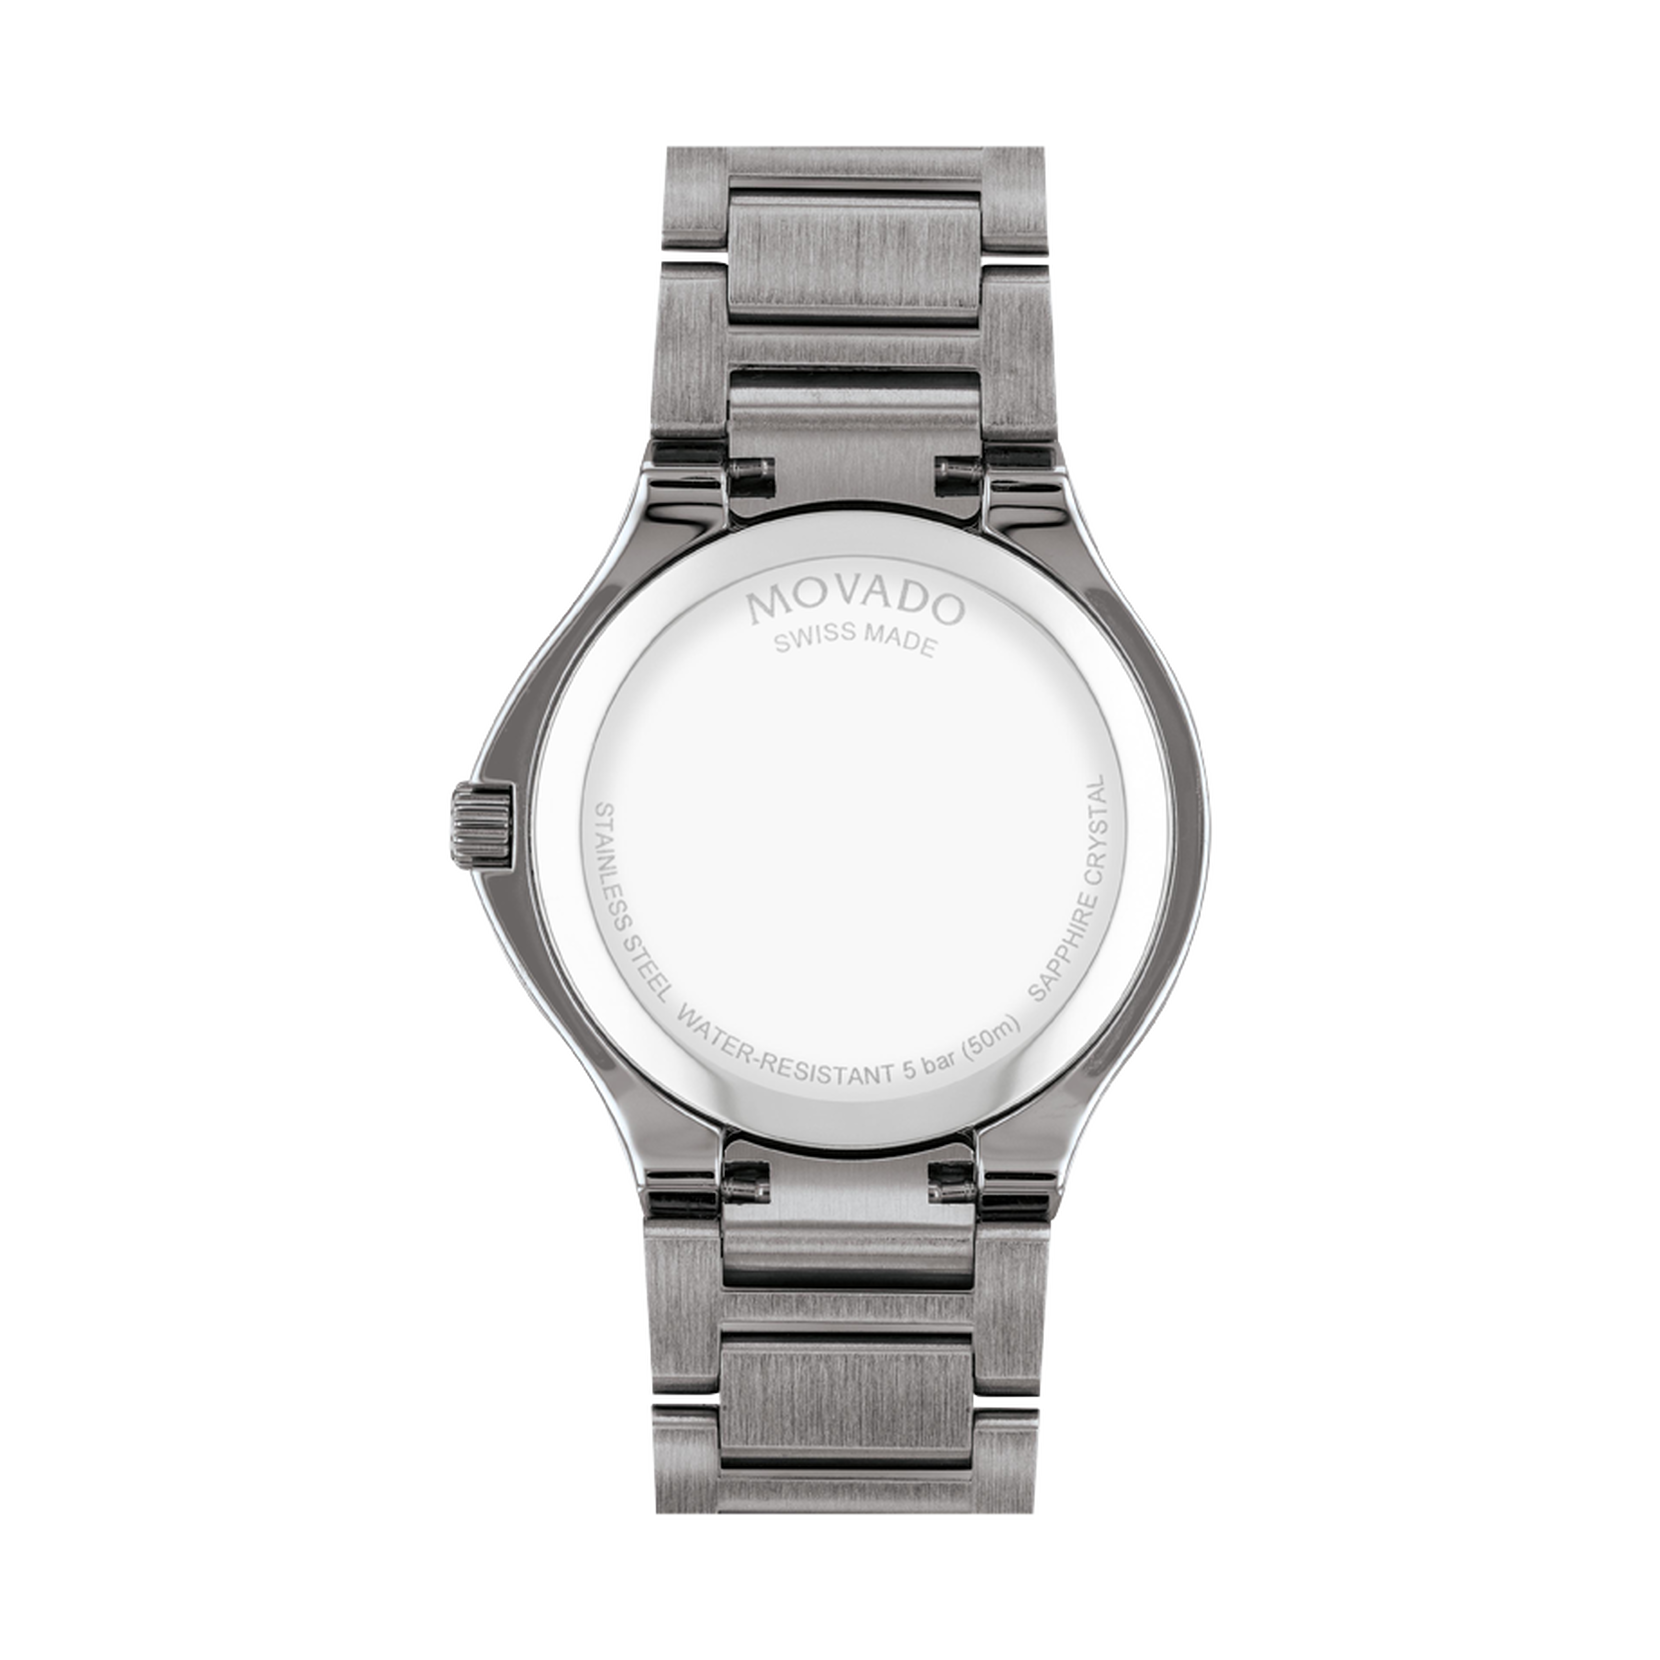 and Features and window, Super-LumiNova accents Movado SE watch. steel Movado hour hands grey mother Swiss markers bezel, date anti-corrosive gold of | dial pearl stainless